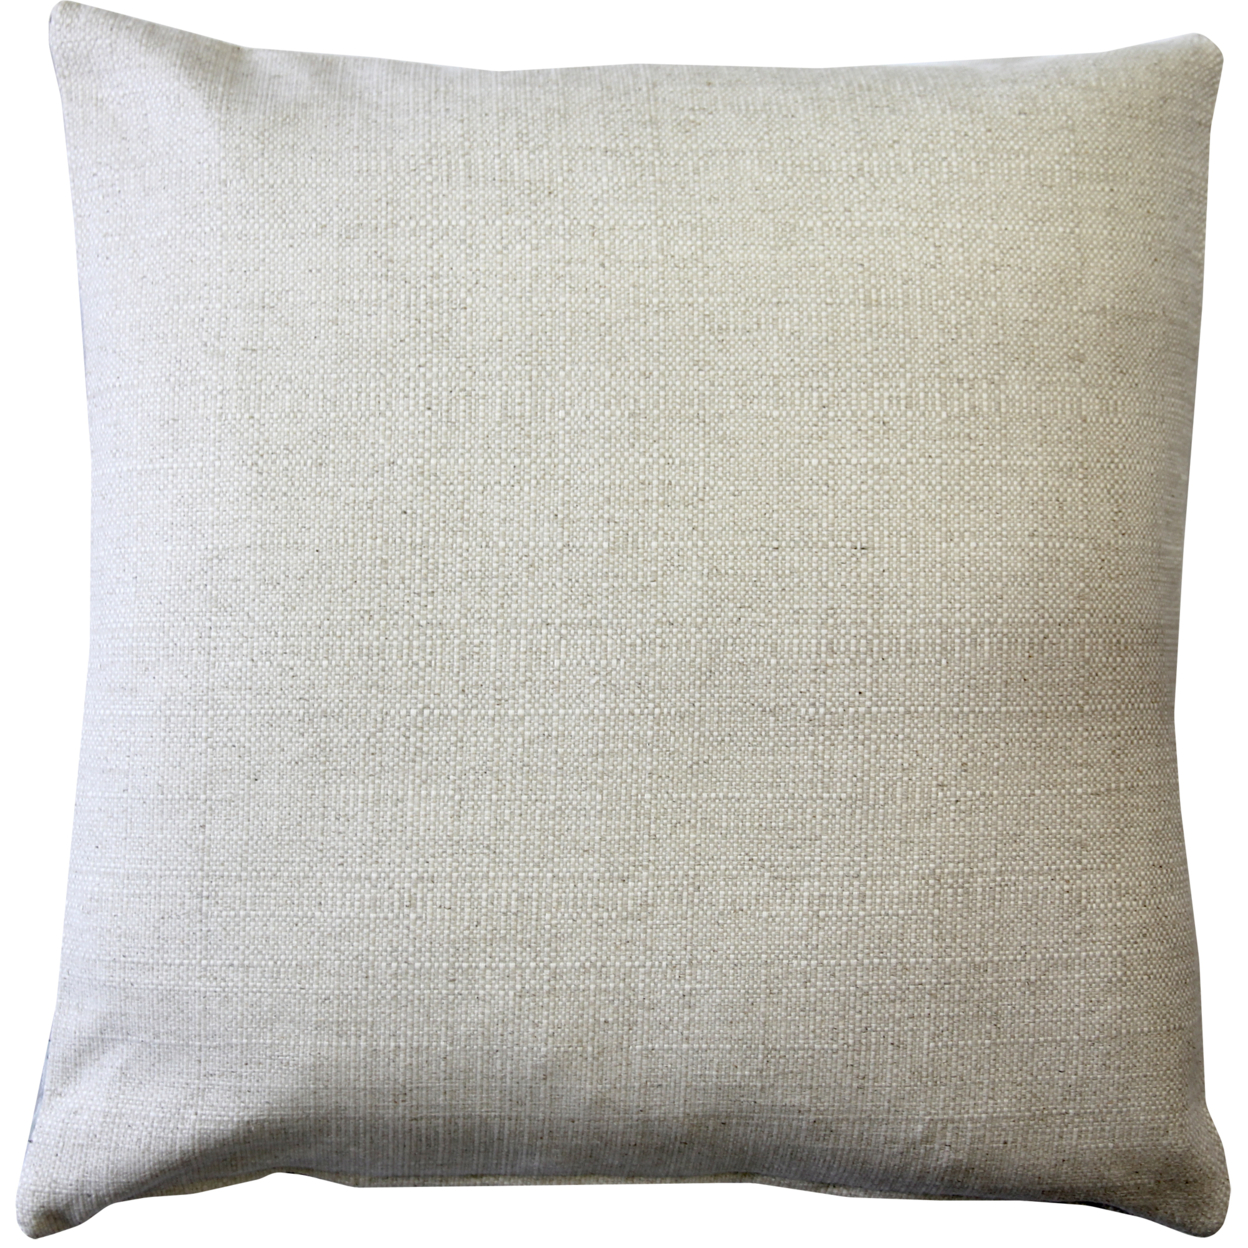 Calliope Gray Damask Pattern Throw Pillow 20x20 Inches Square, Complete Pillow With Polyfill Pillow Insert